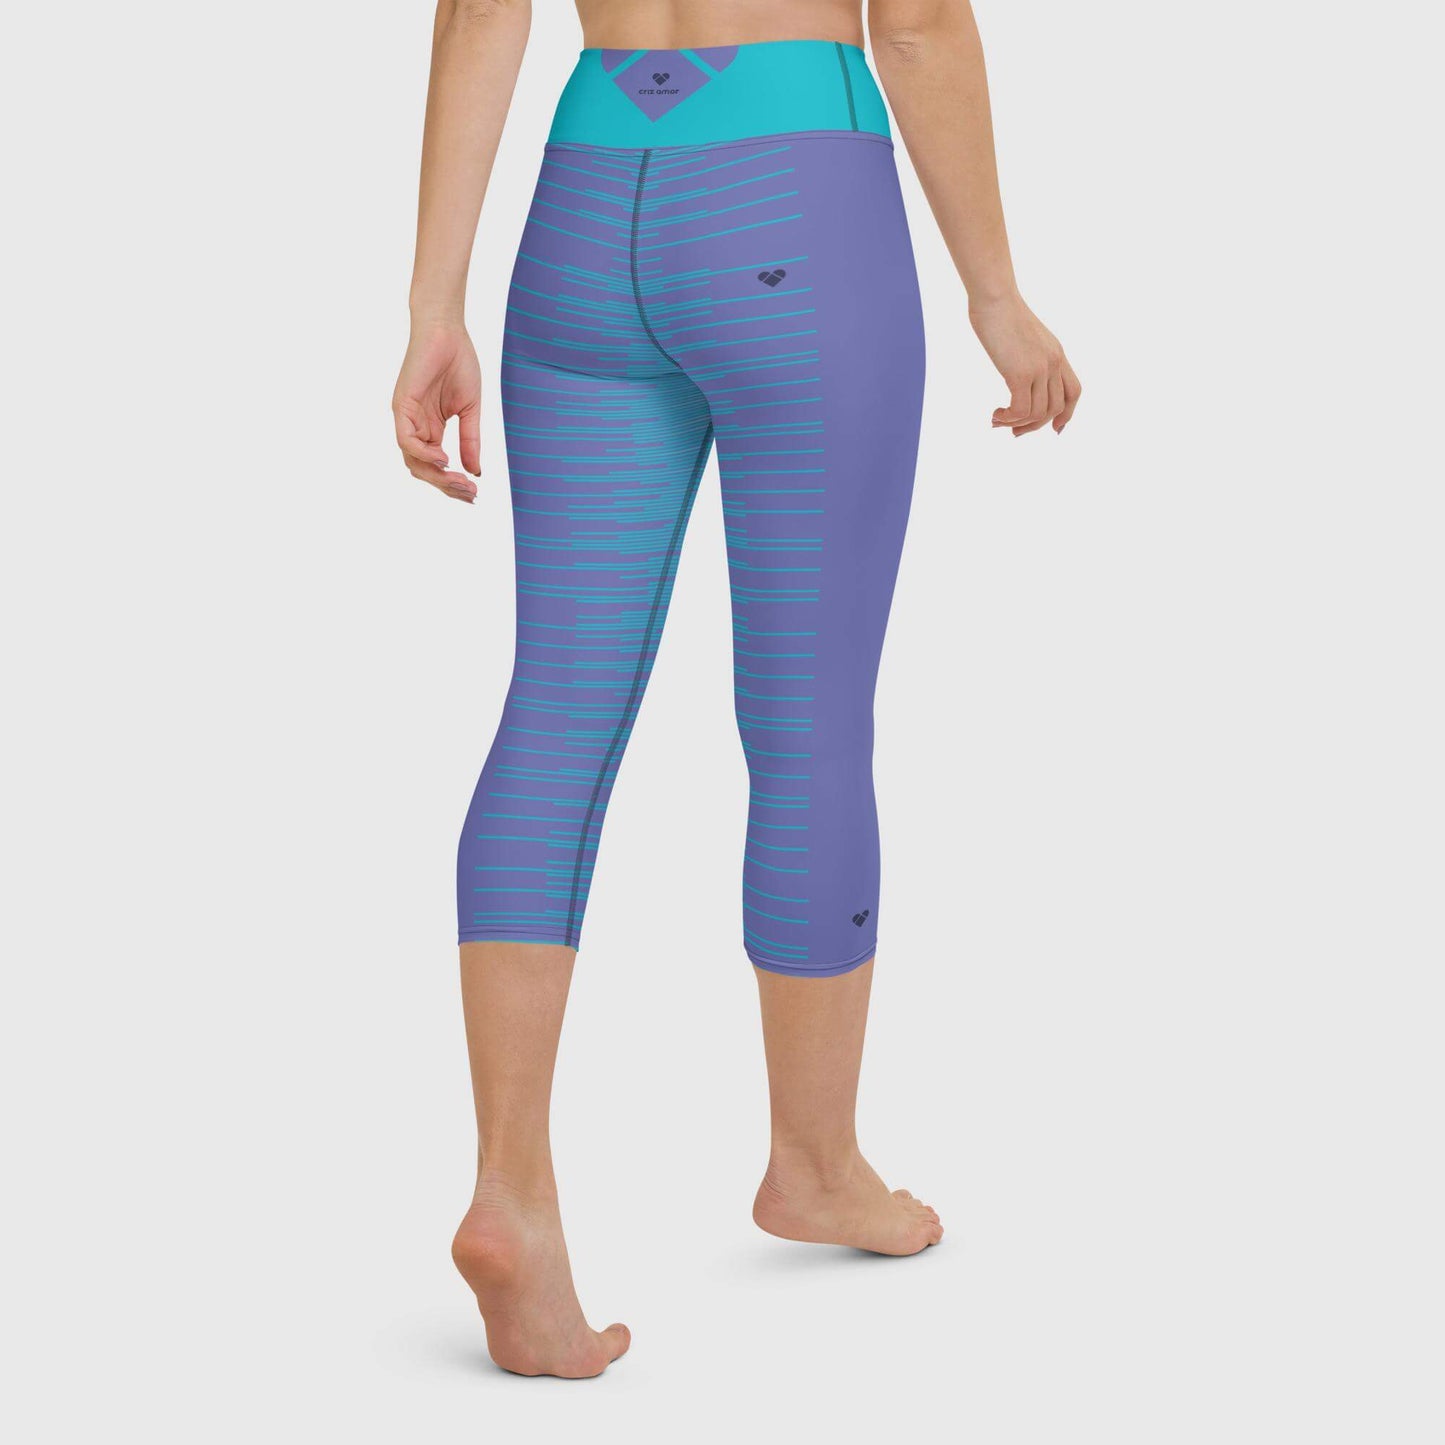 Turquoise Belt and Heart Logo on Periwinkle Dual Yoga Capri Leggings - A unique touch of love